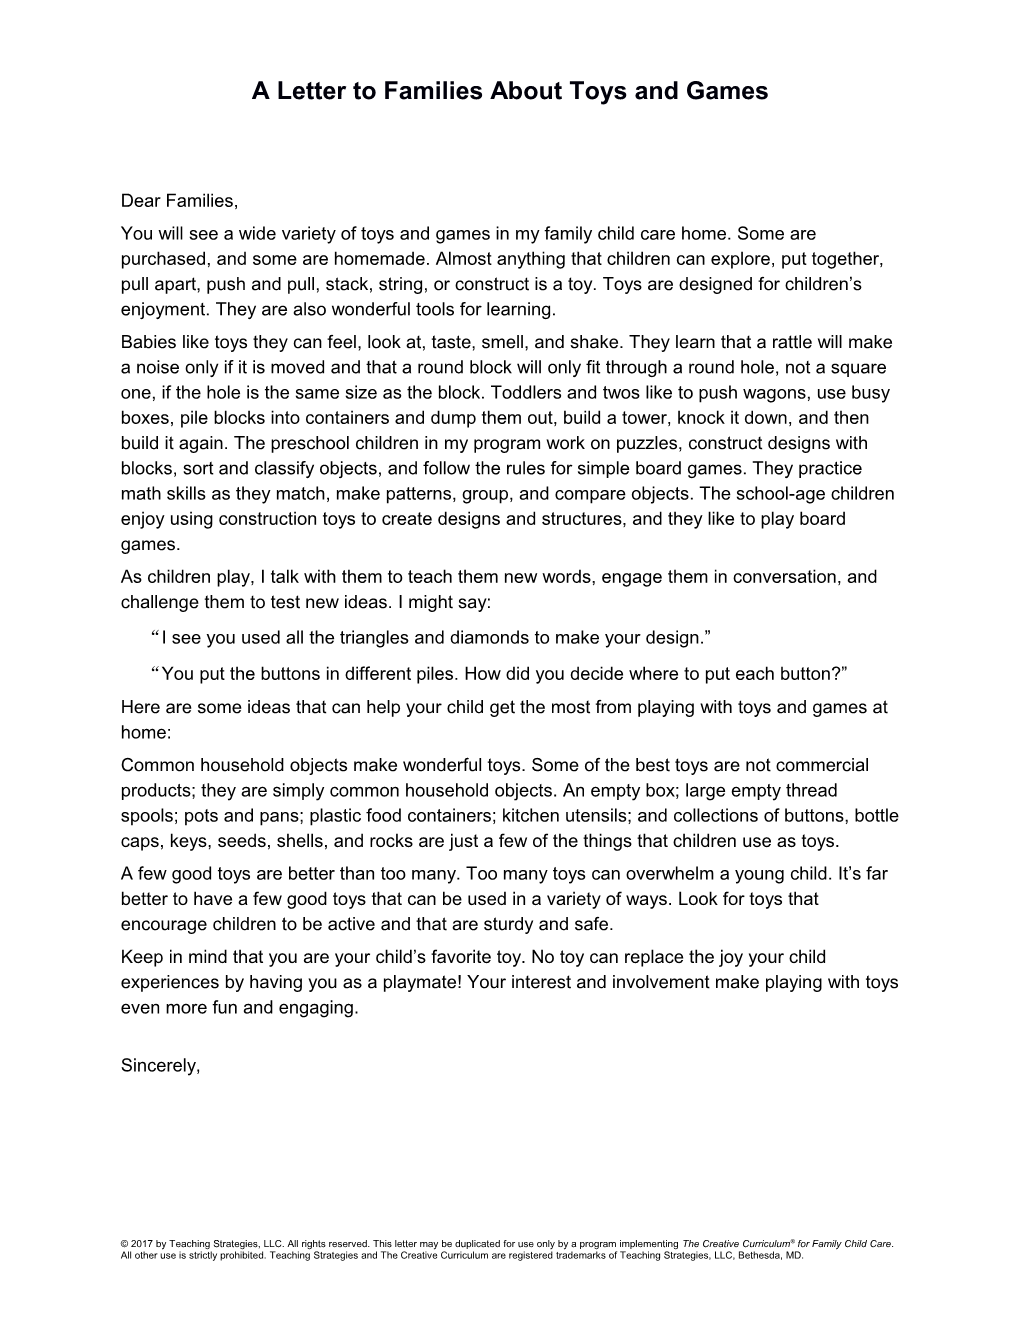 A Letter to Families About Toys and Games